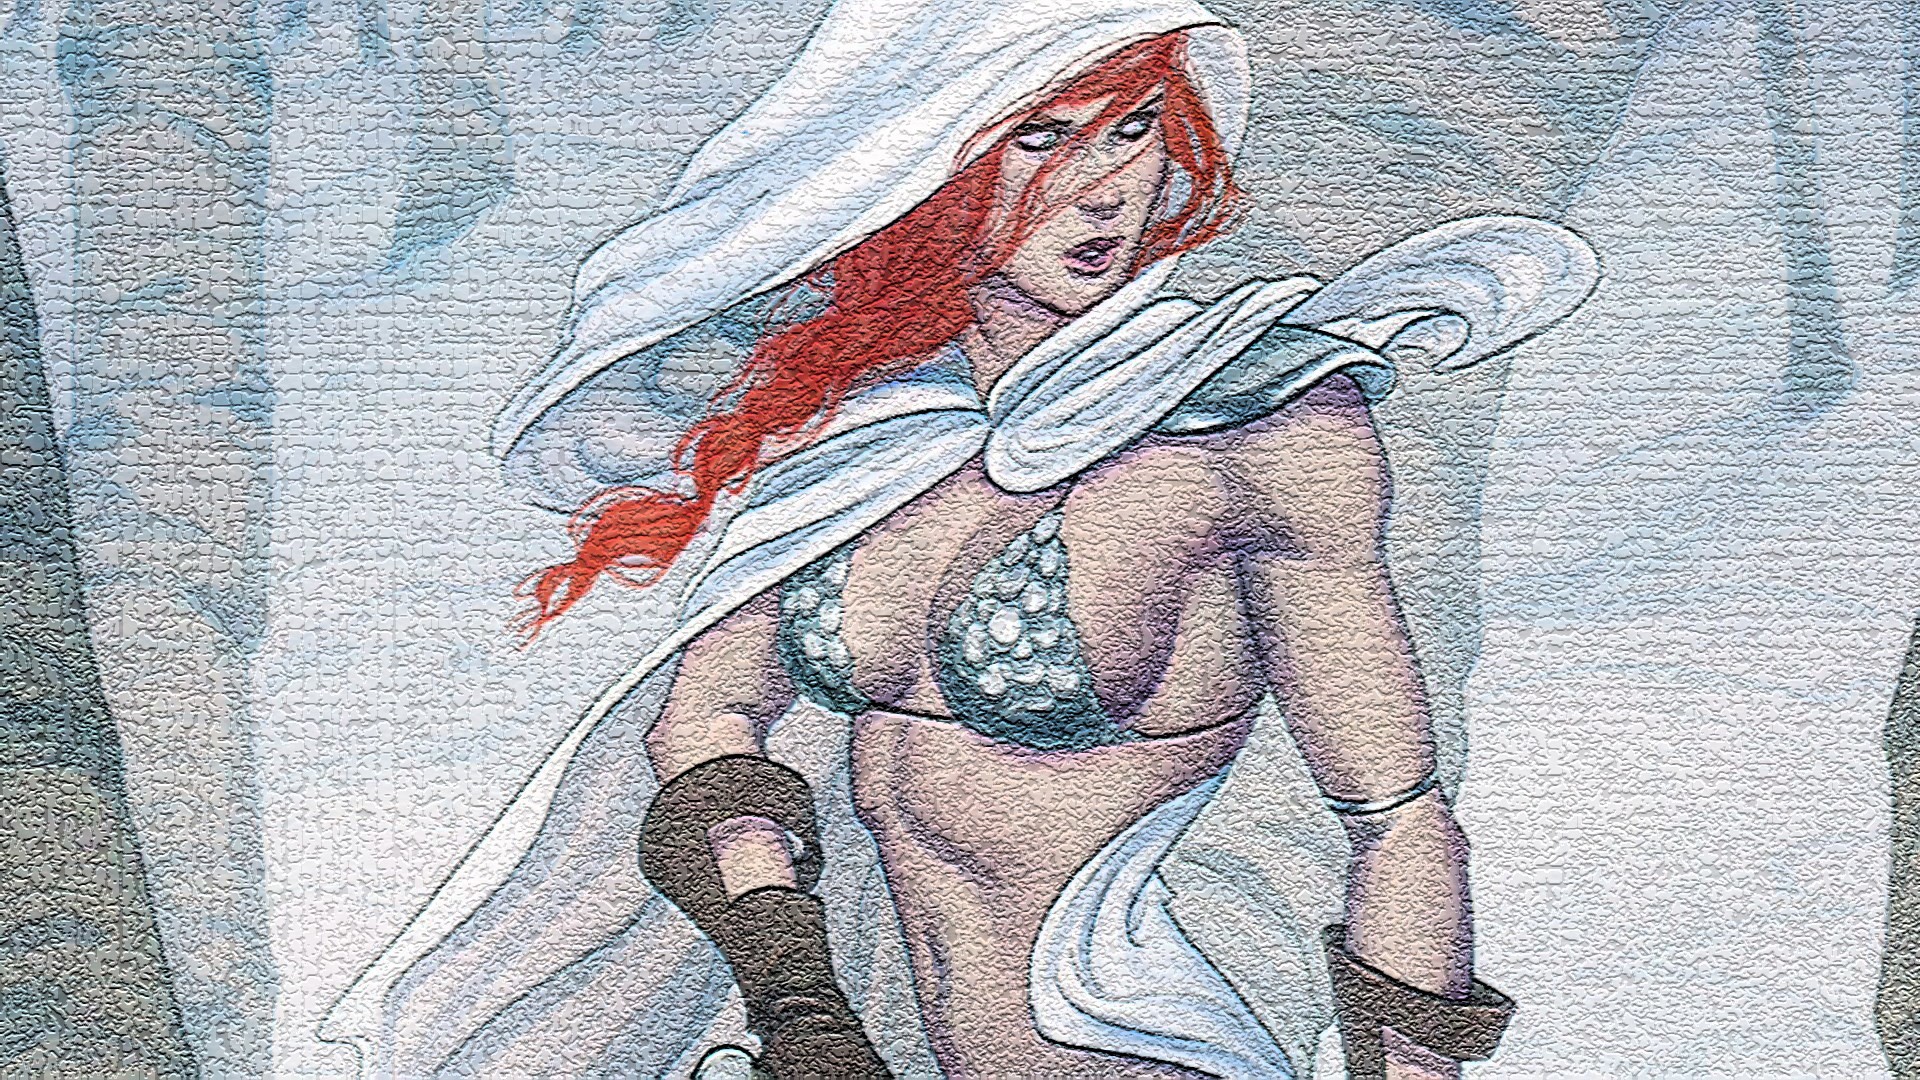 1920x1080 free wallpaper and screensavers for red sonja by Neshaun Nash-Williams  (2017-03